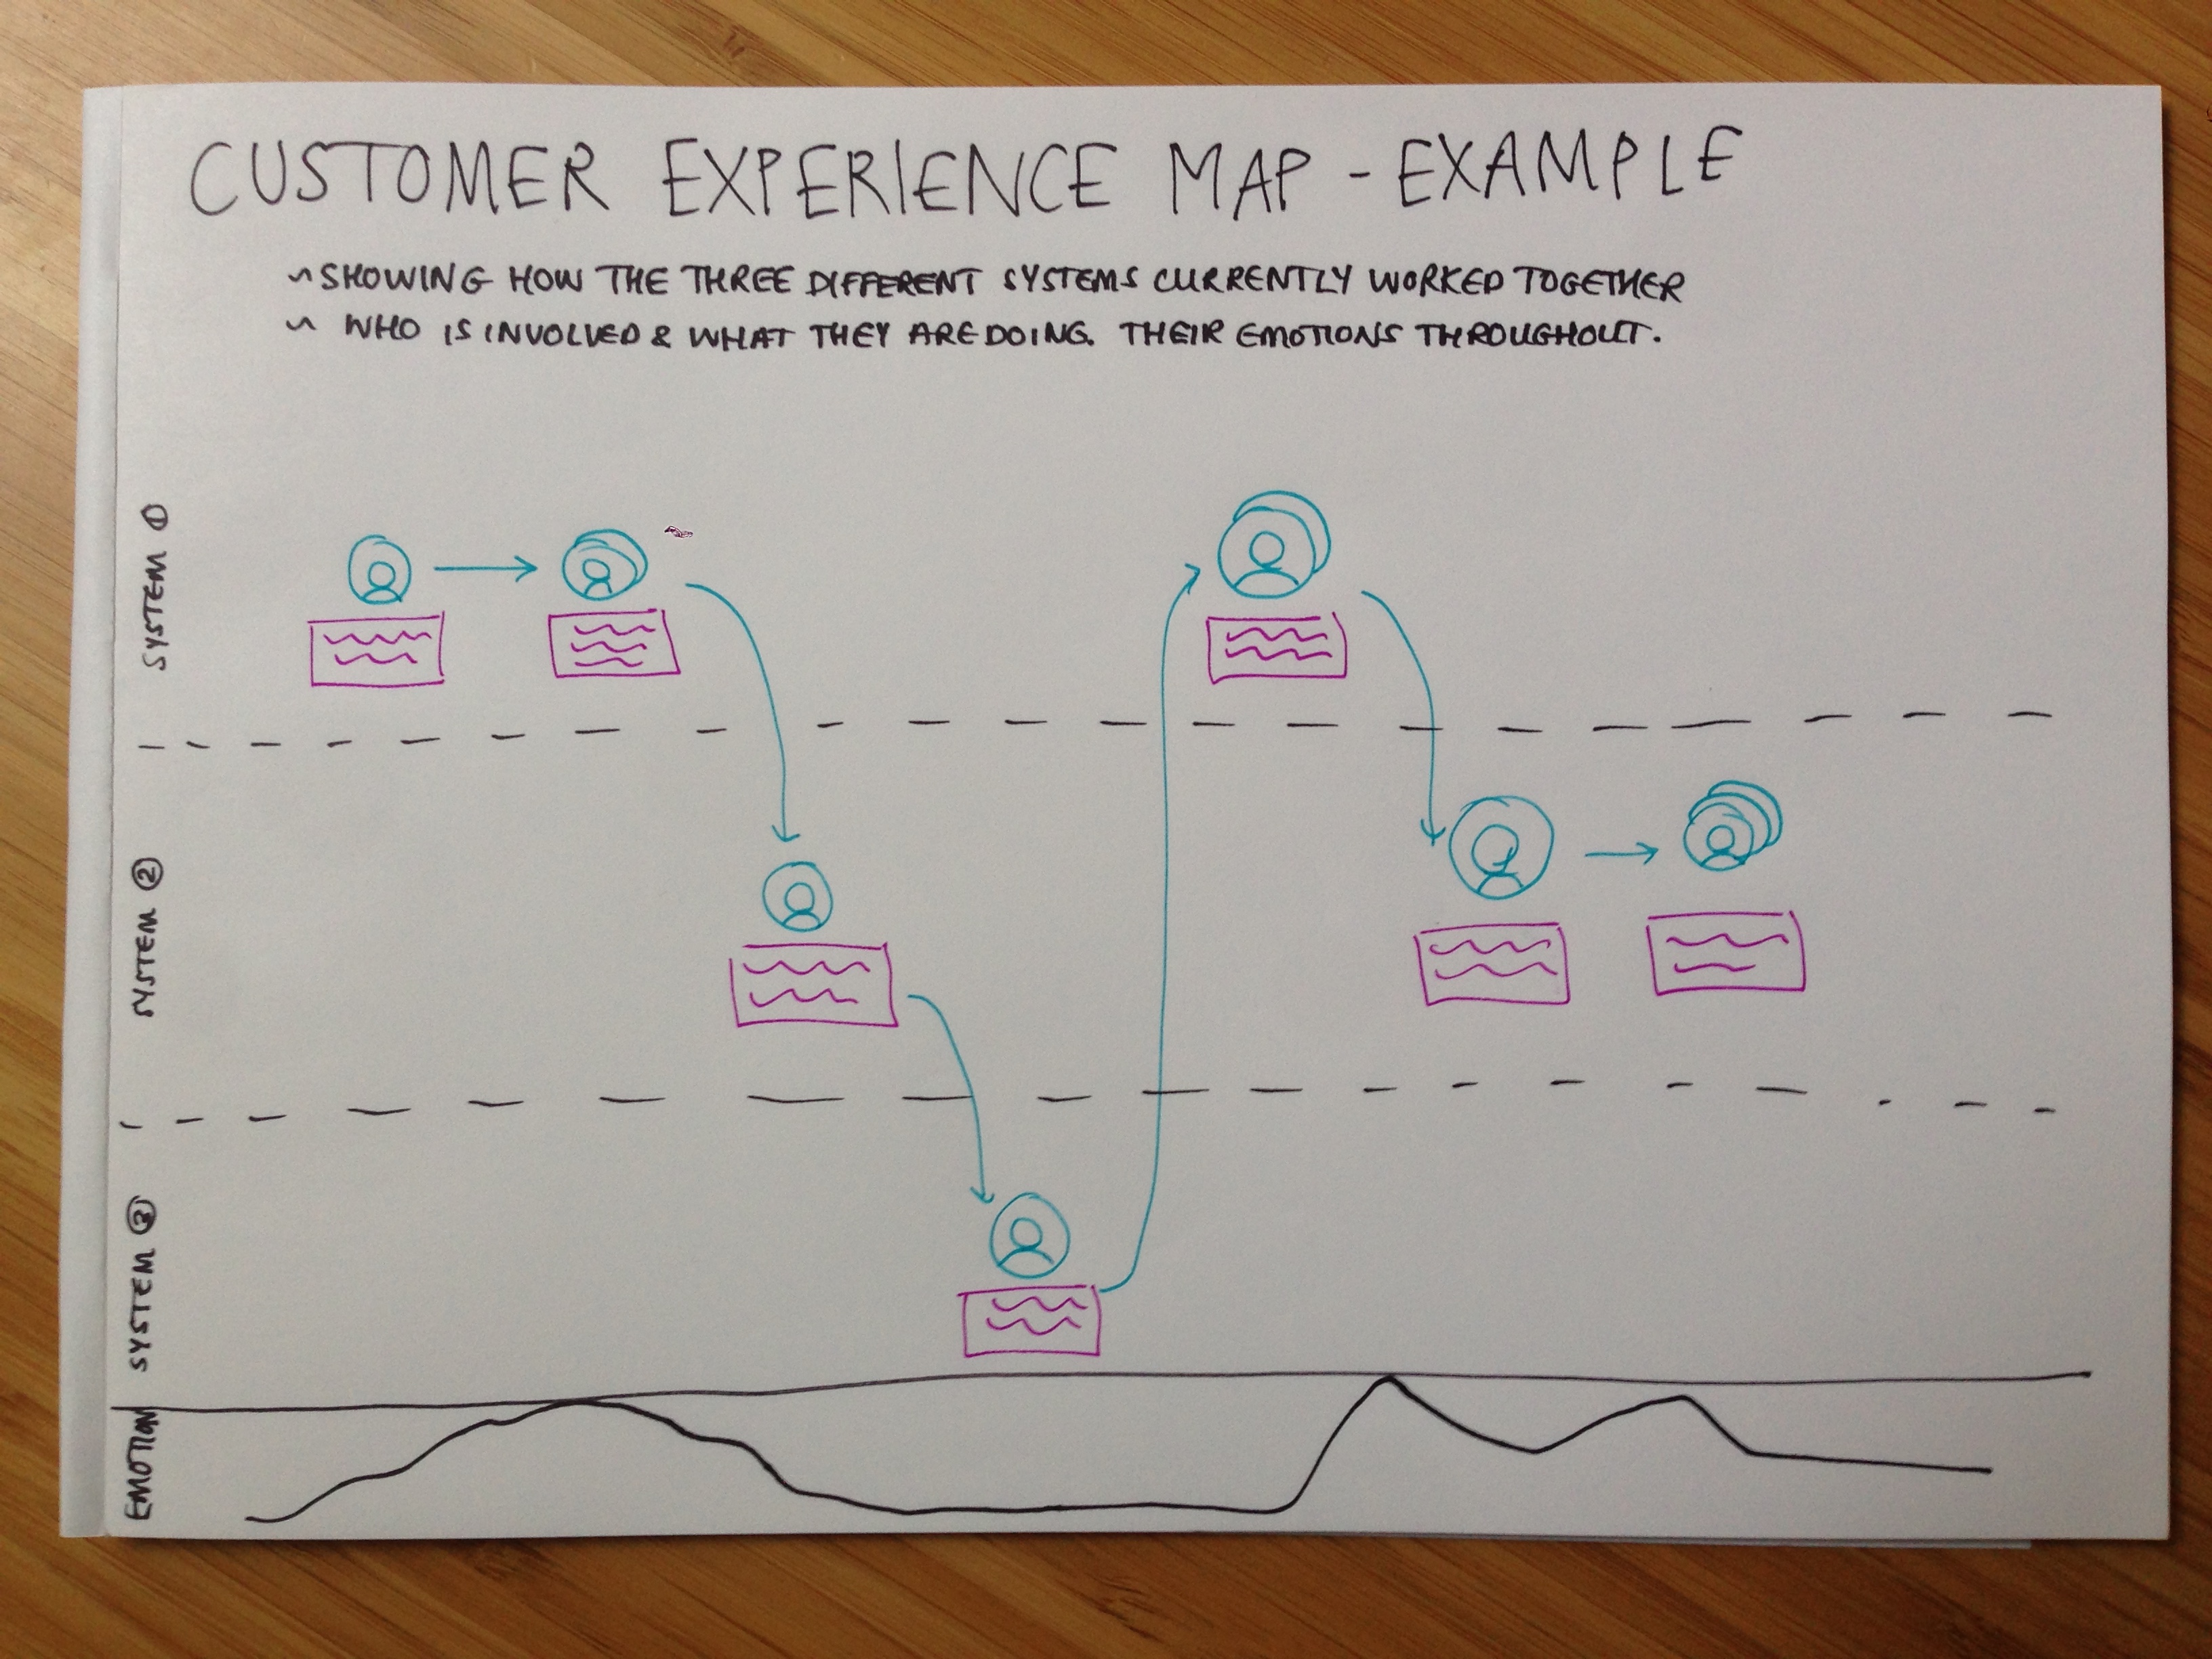 Customer experience map sketch